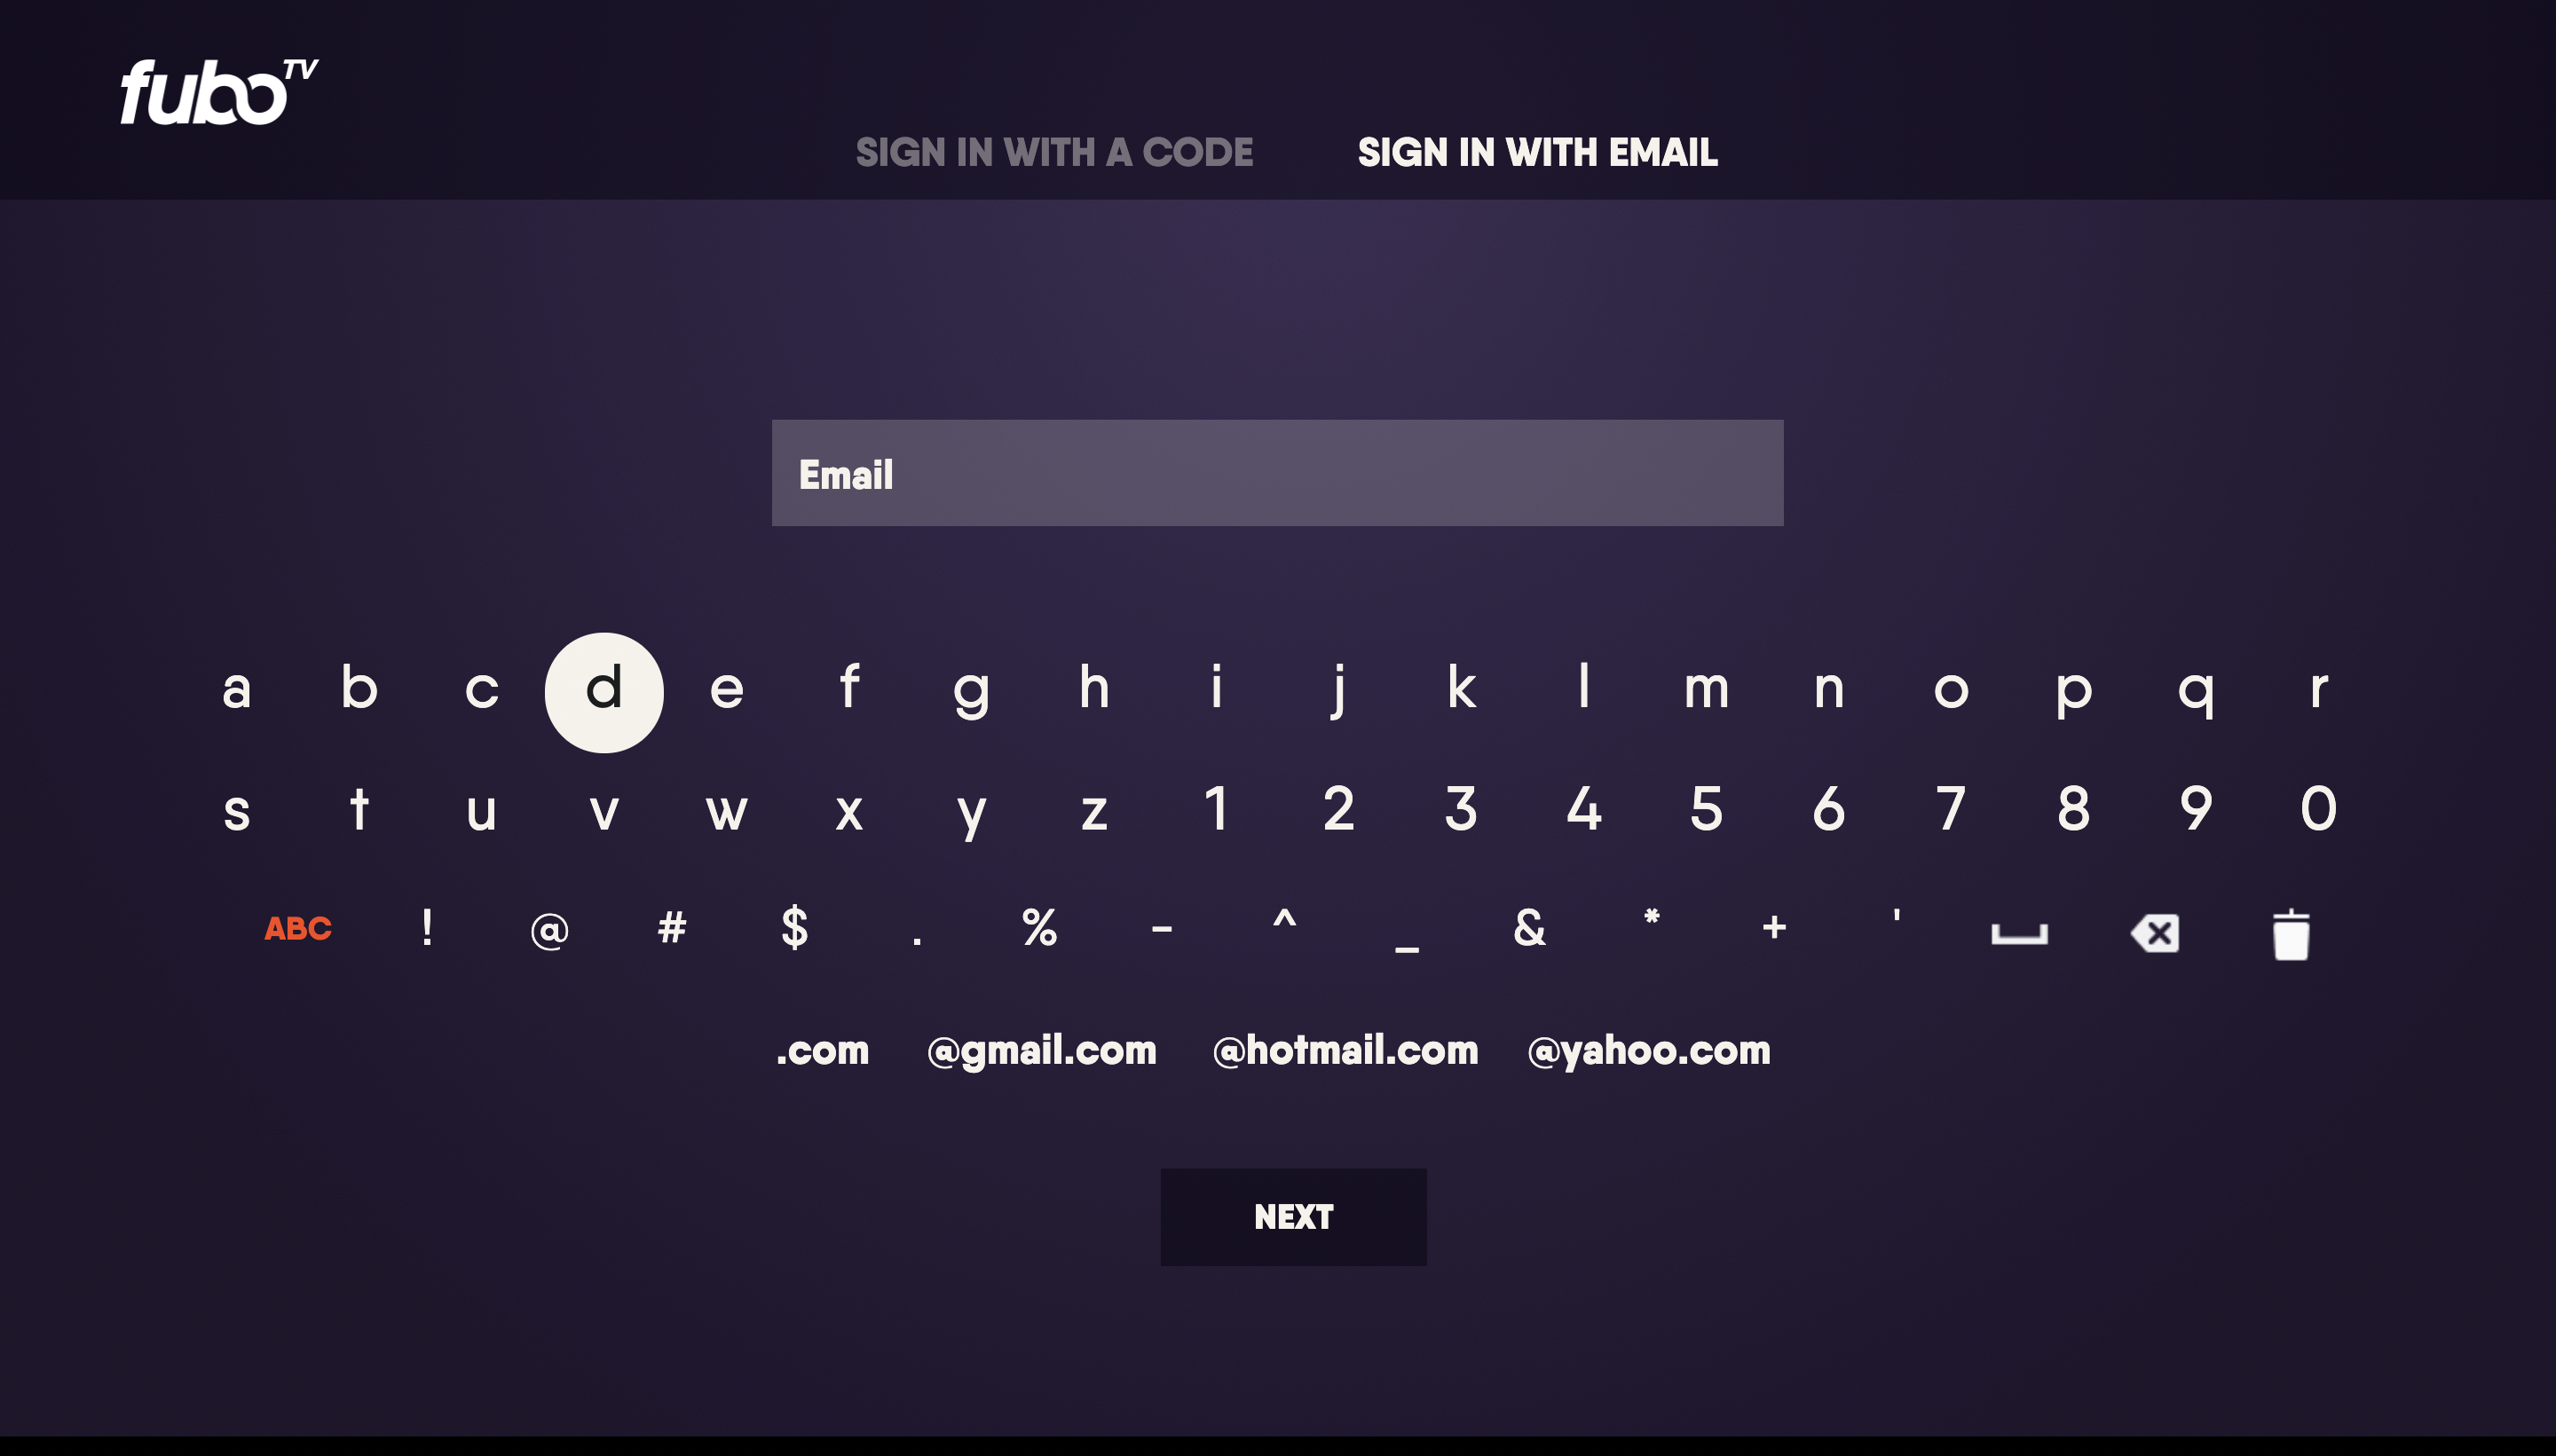 On-screen keyboard to sign in to the Fubo app on Hisense TV using the remote